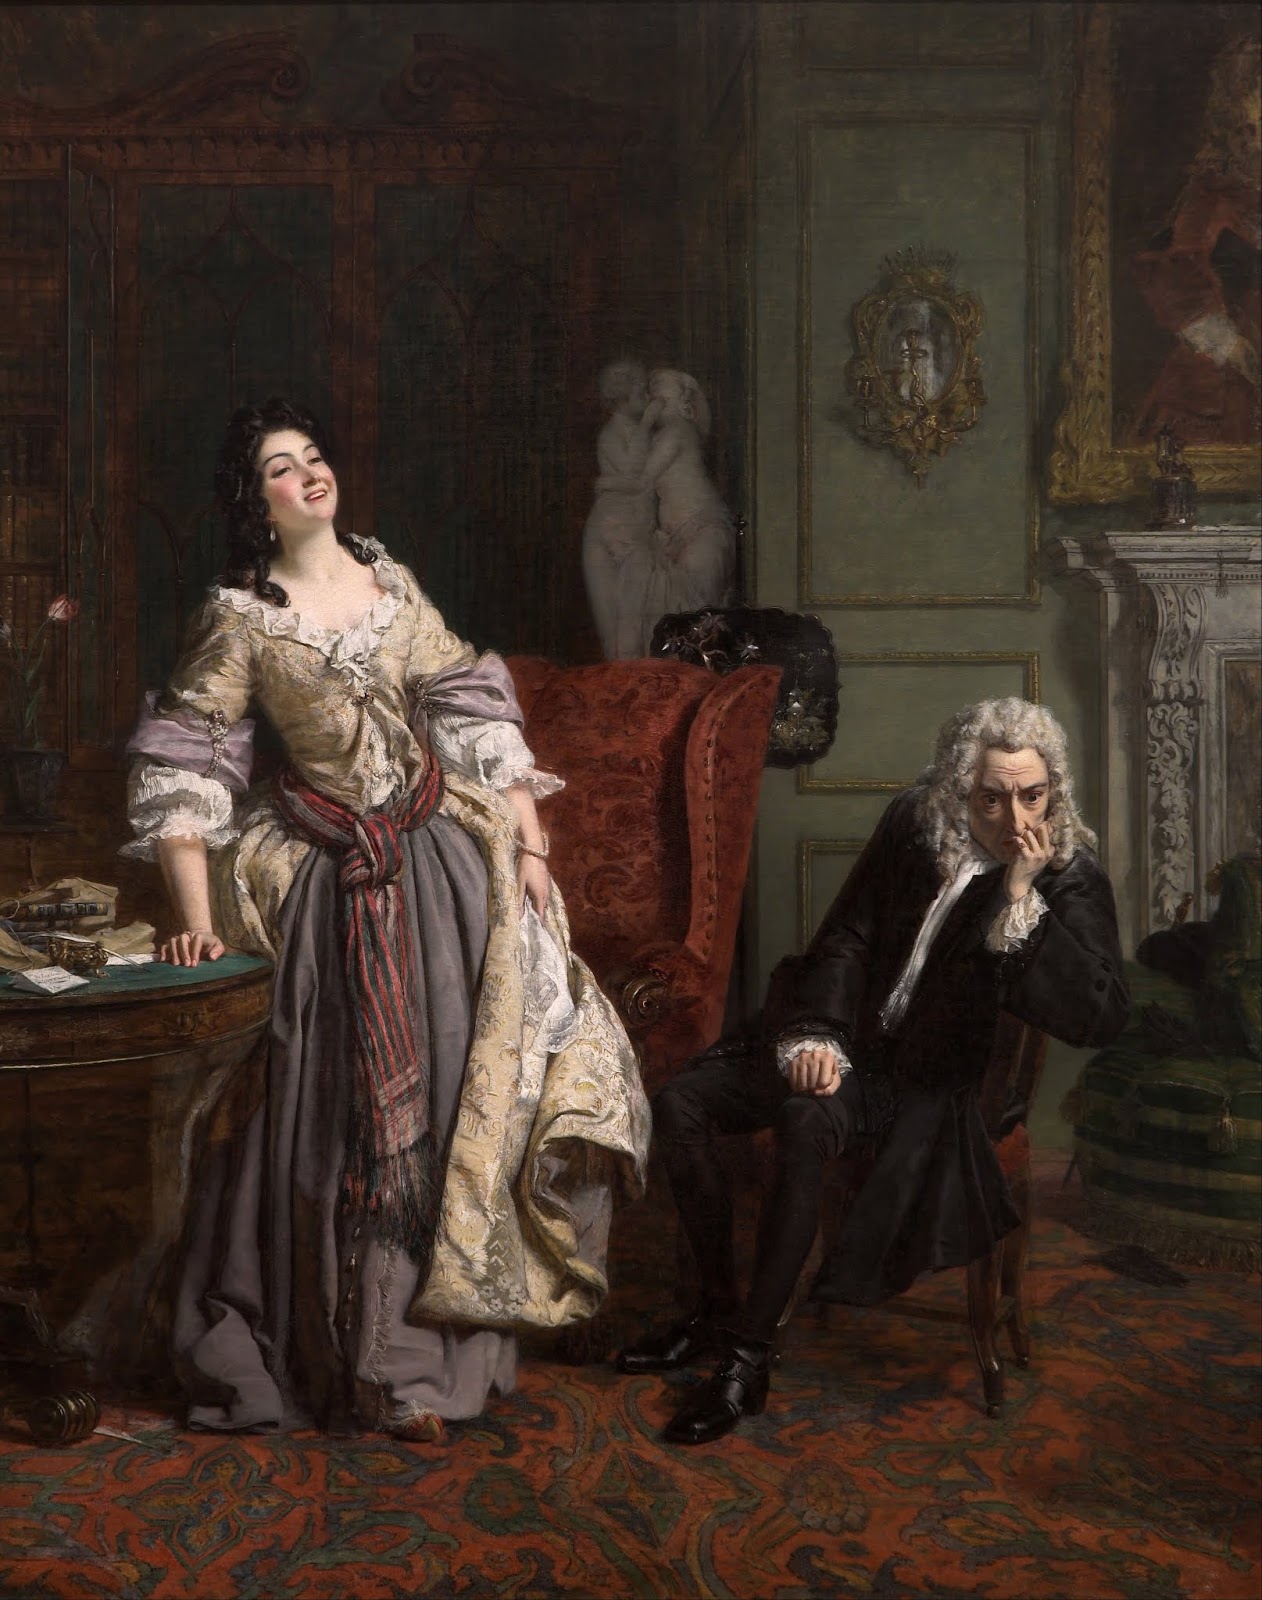 Paintings by William Powell Frith